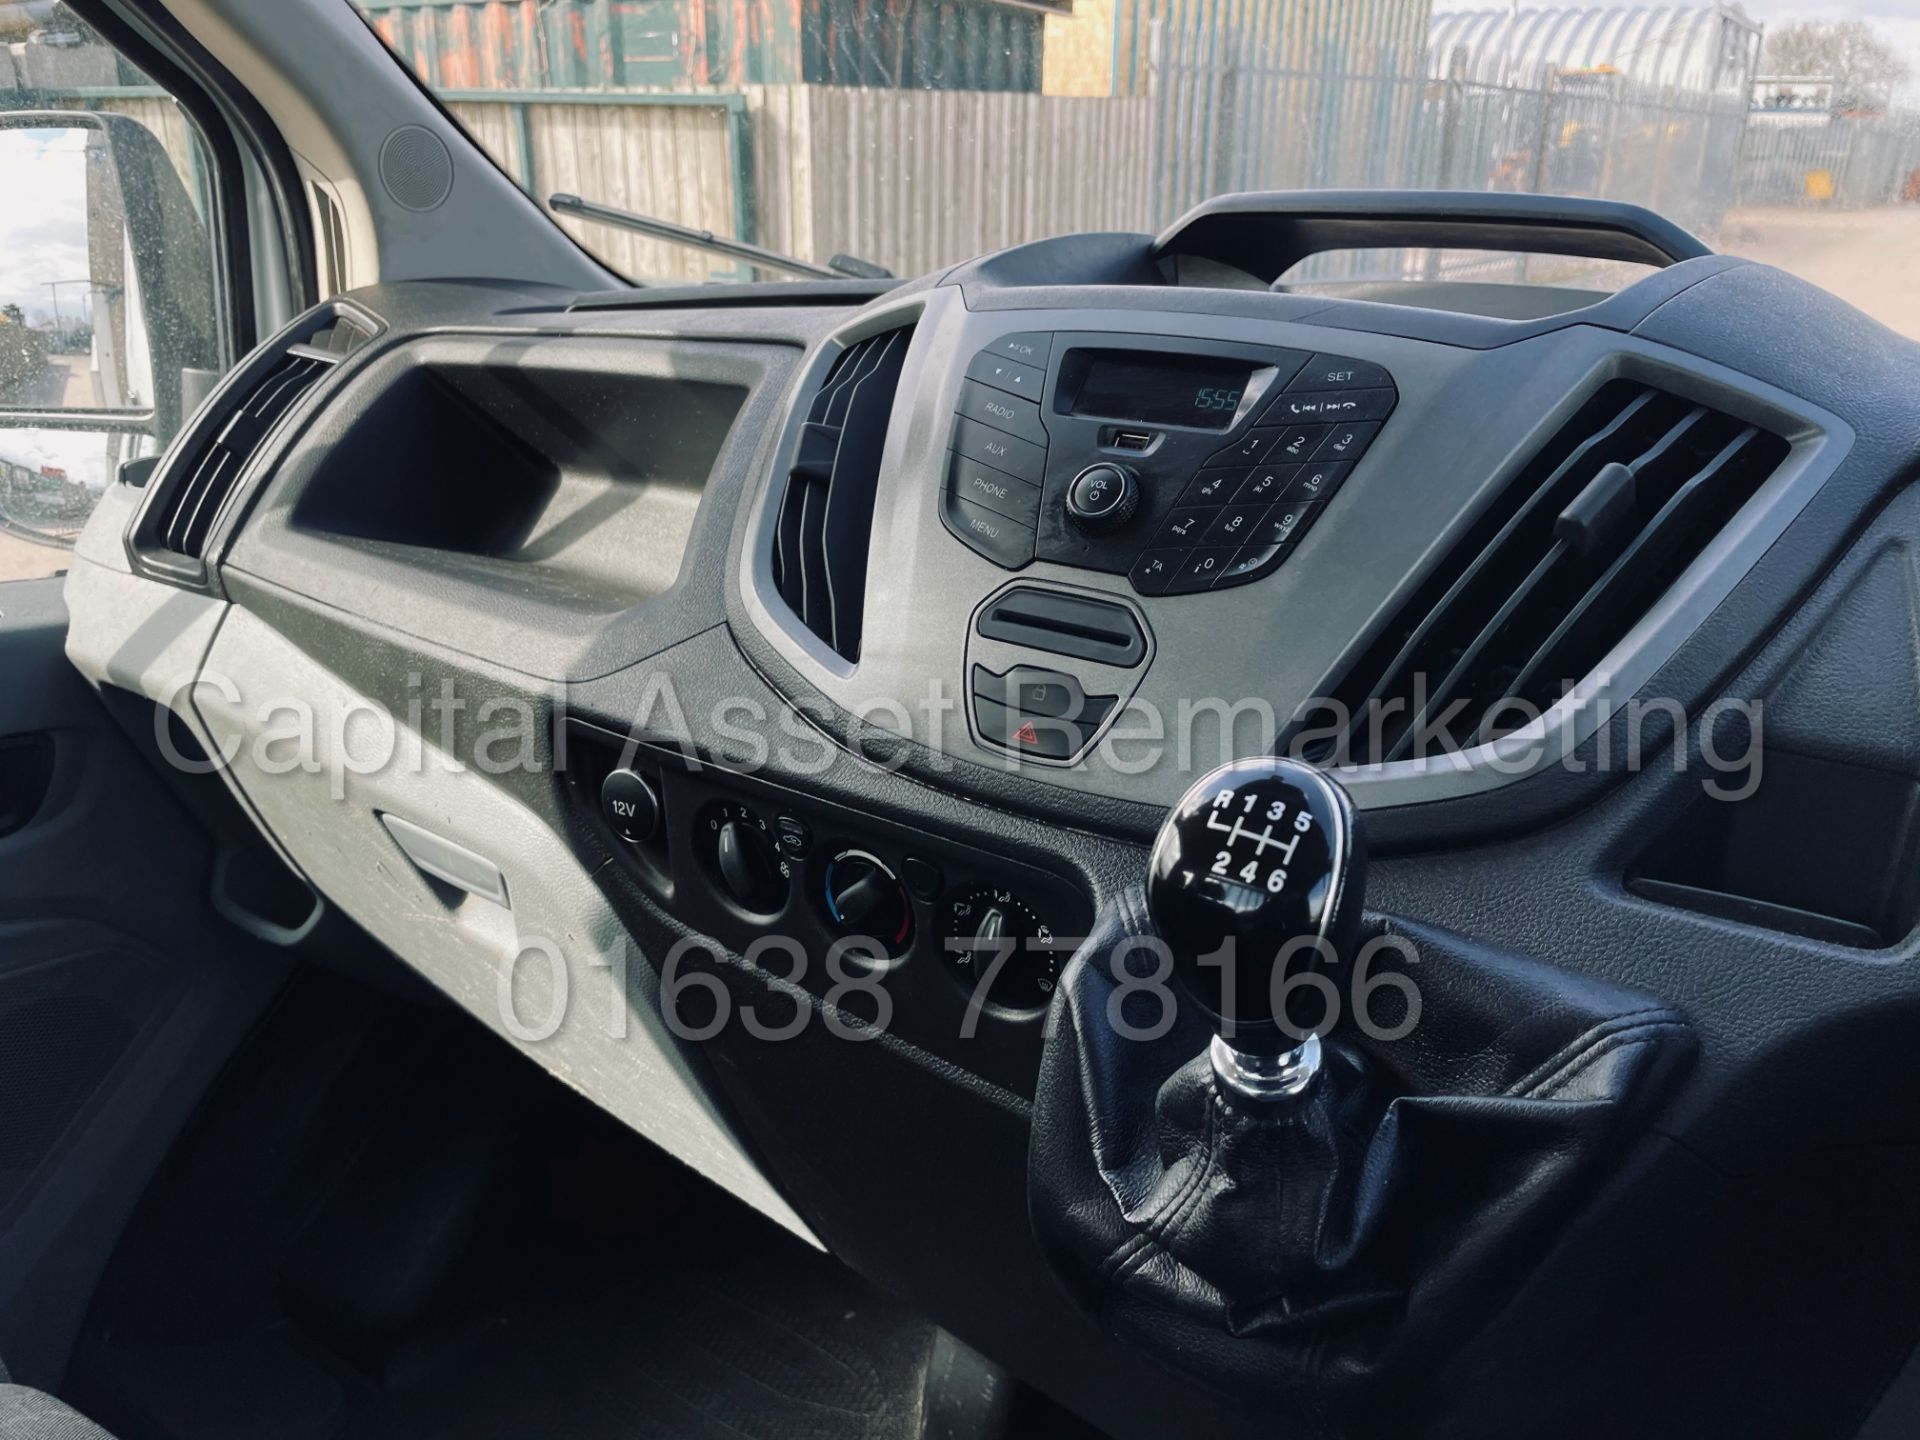 ON SALE FORD TRANSIT 130 T350 *LWB - ALLOY DROPSIDE * (2018 MODEL - EURO 6) '130 BHP - ' (1 OWNER) - Image 34 of 41